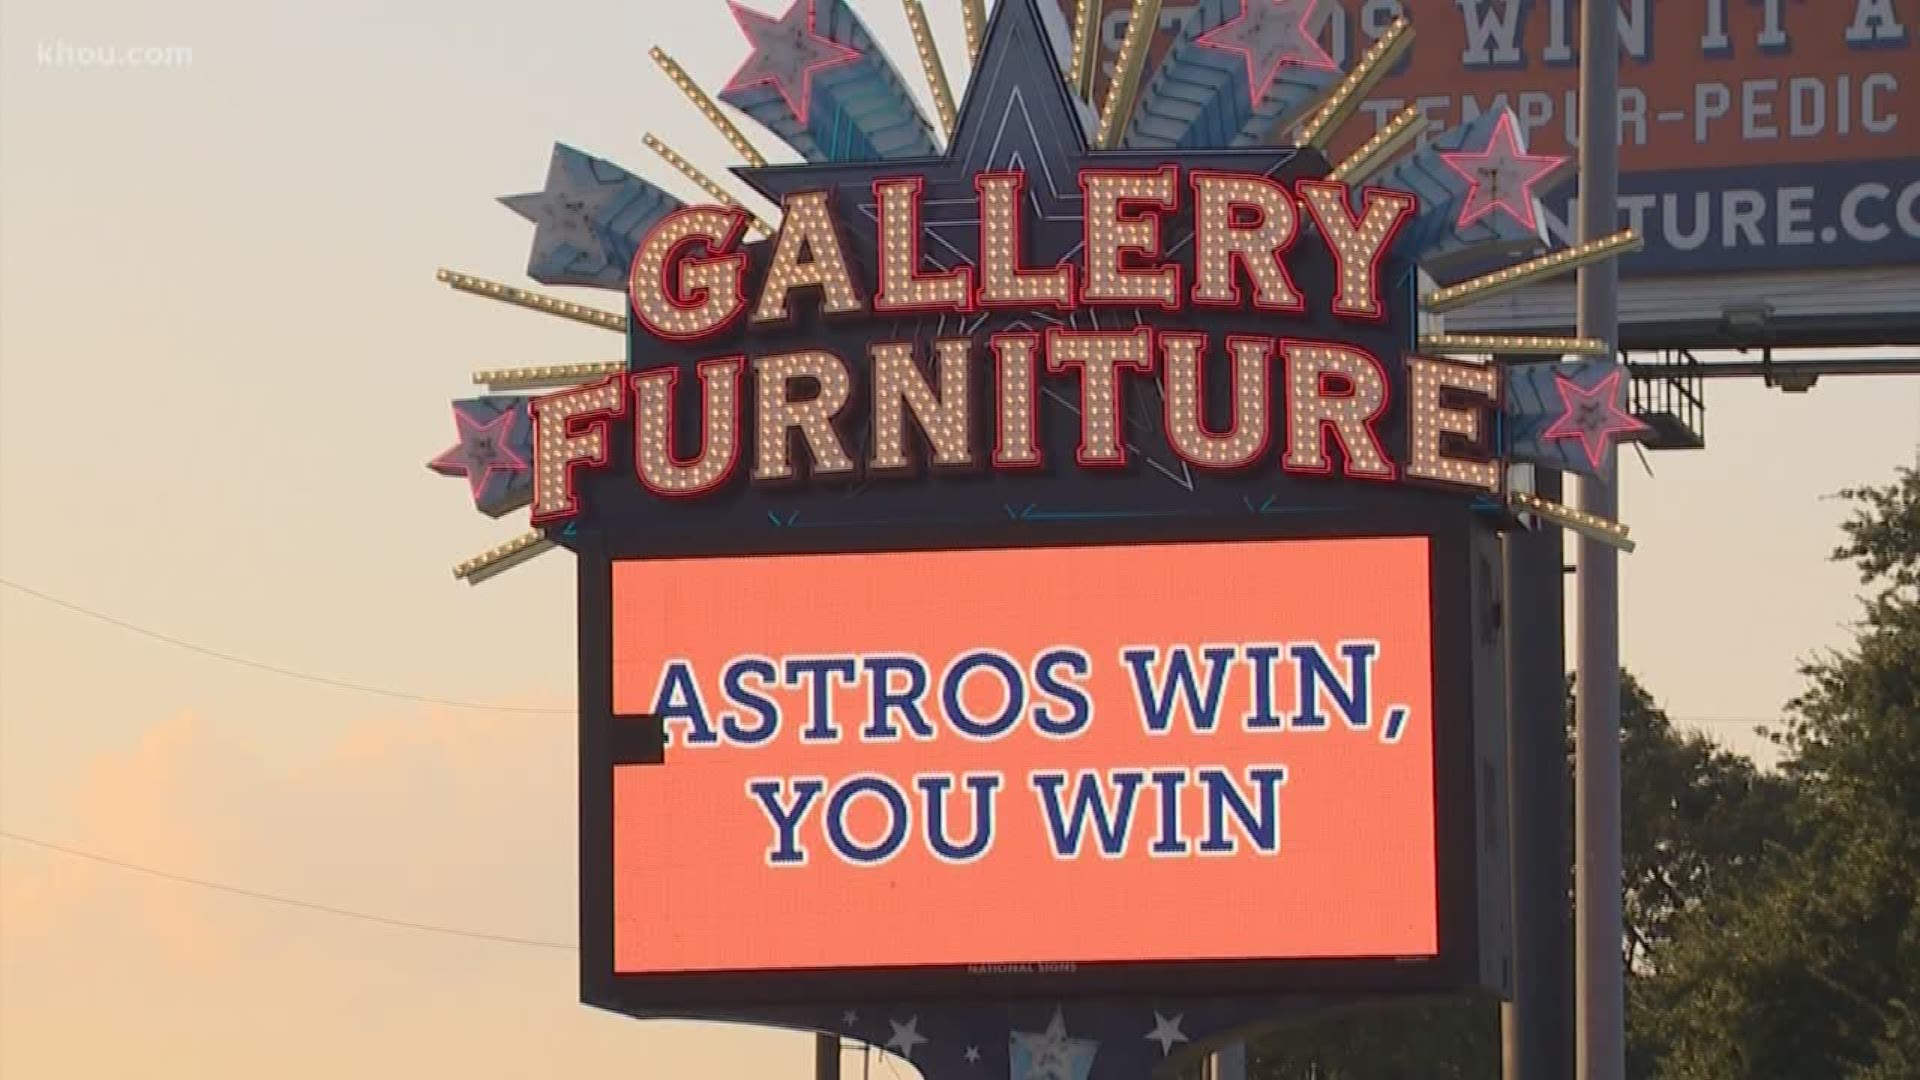 Mattress Mack has millions of dollars riding on an Astros World Series win. He has promised to refund customers who bought mattresses if the Astros win it all.